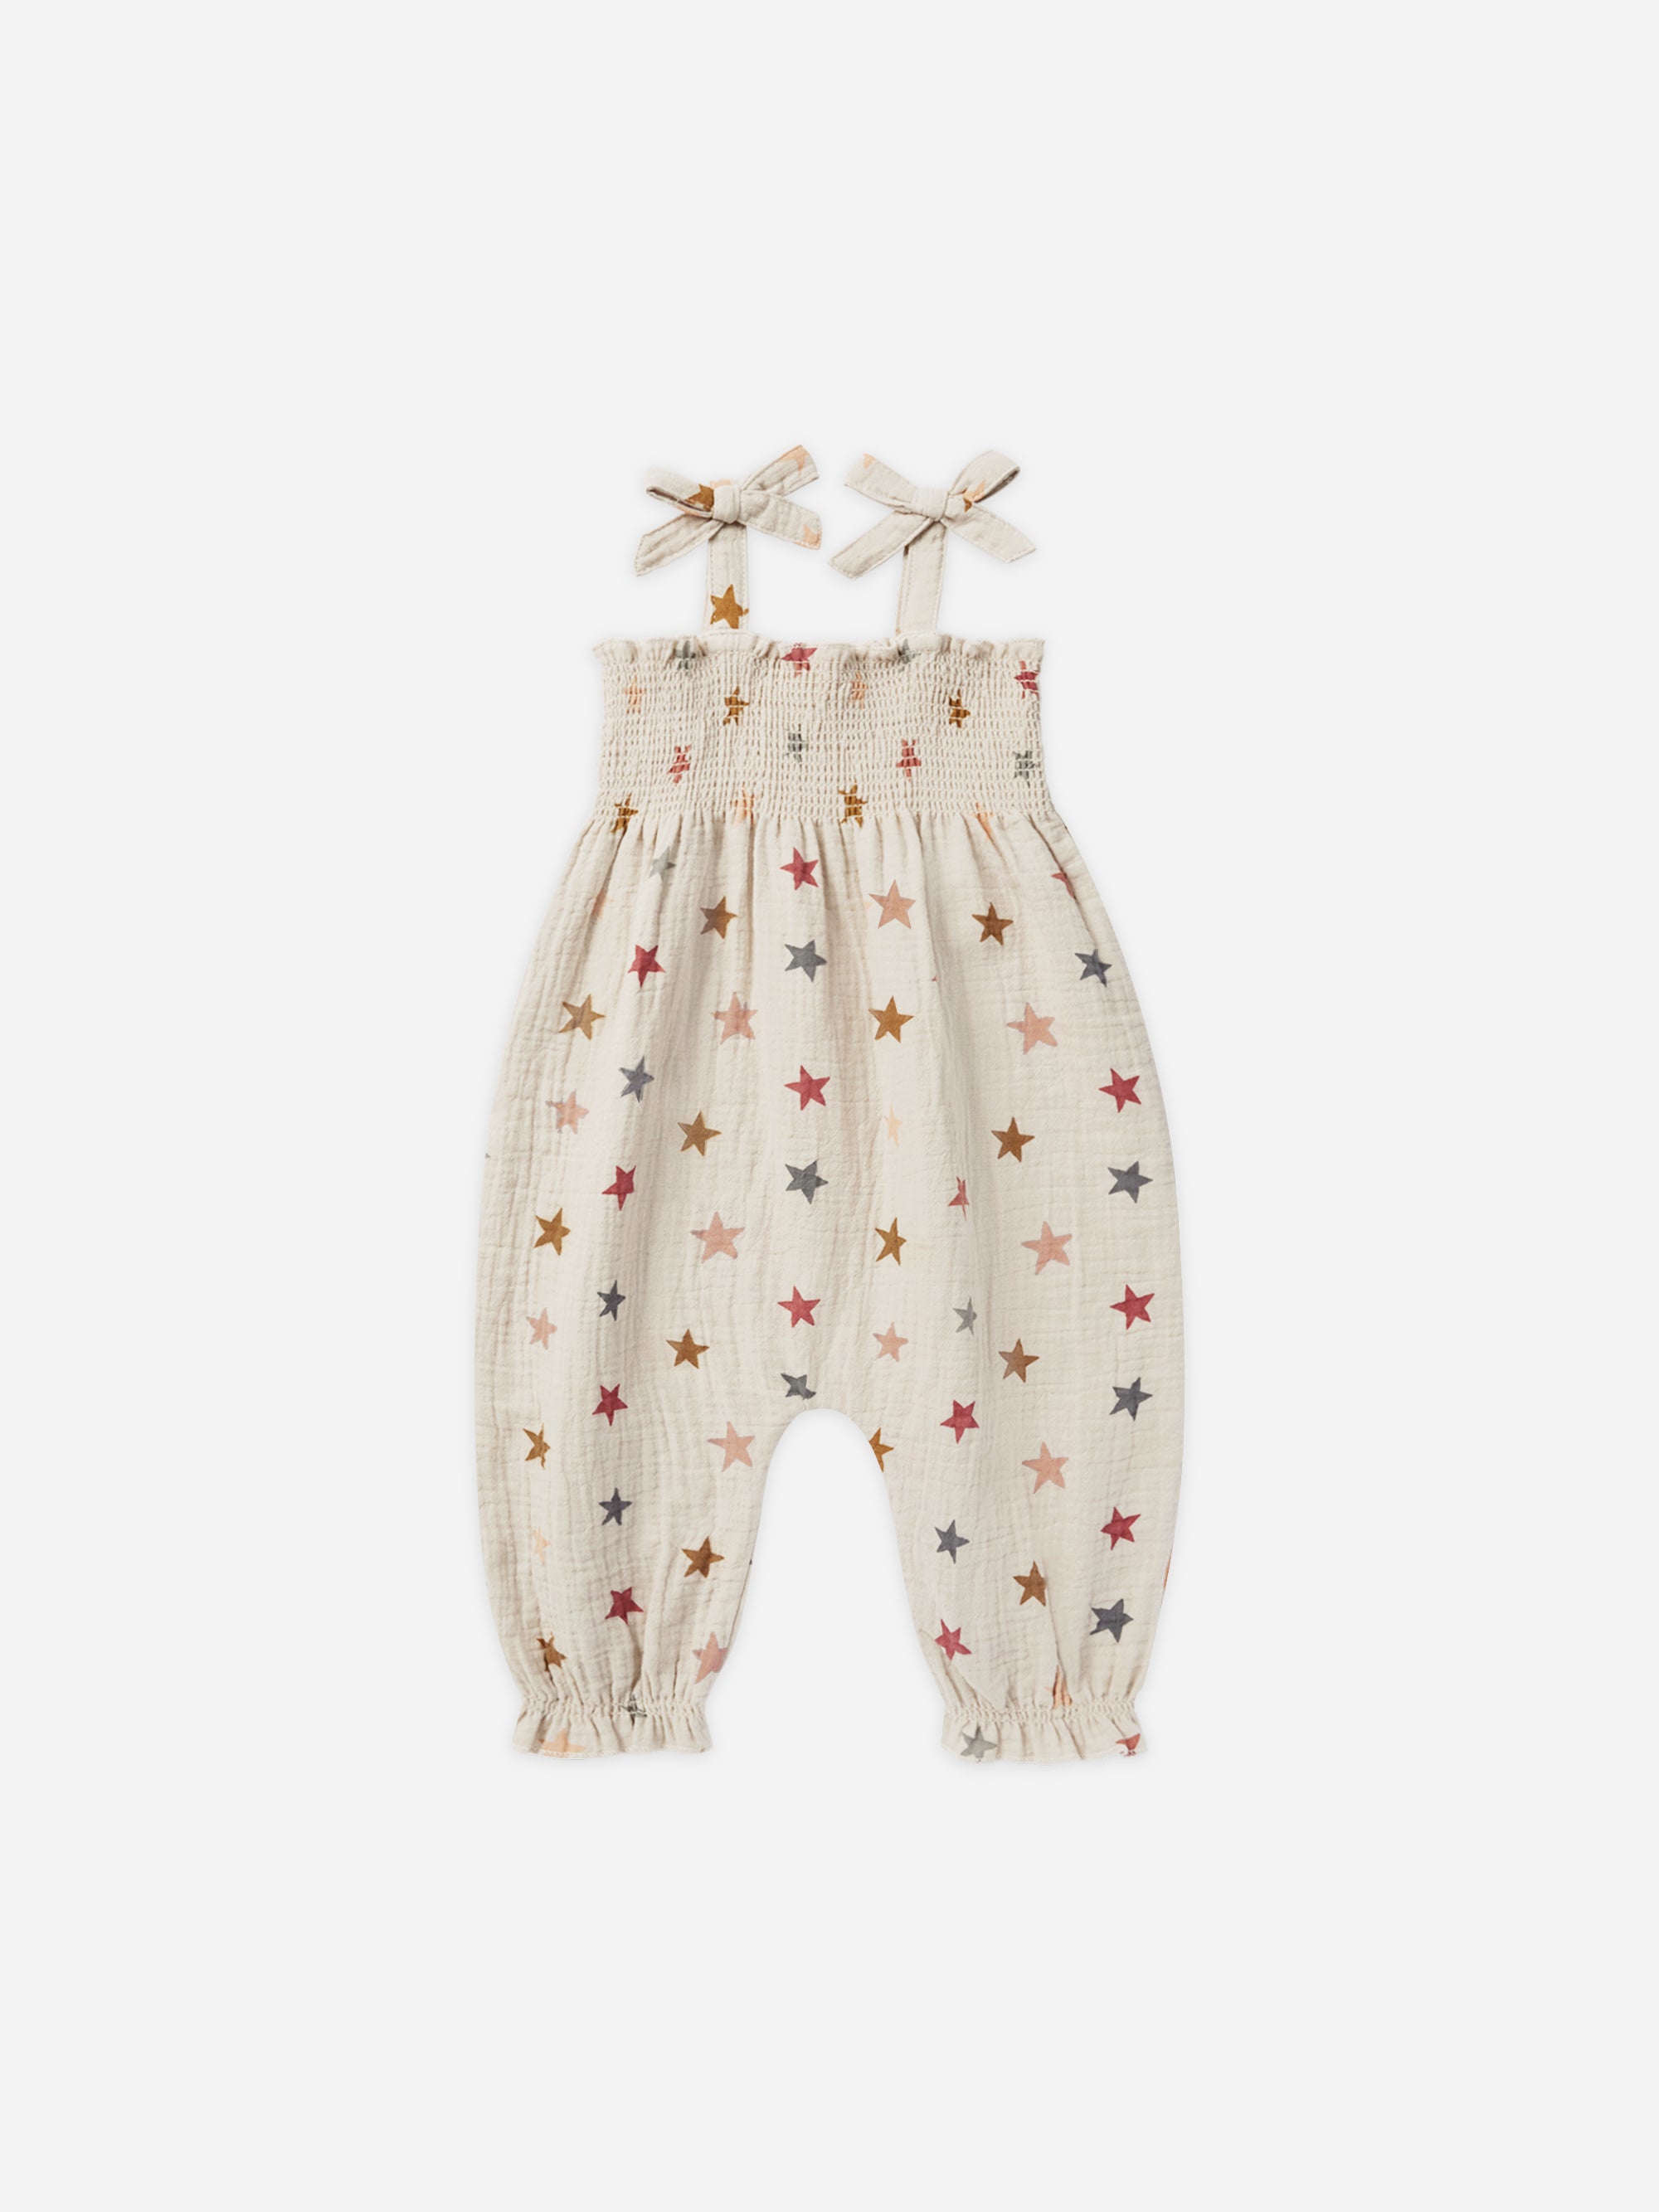 Sawyer Jumpsuit || Stars - Rylee + Cru | Kids Clothes | Trendy Baby Clothes | Modern Infant Outfits |